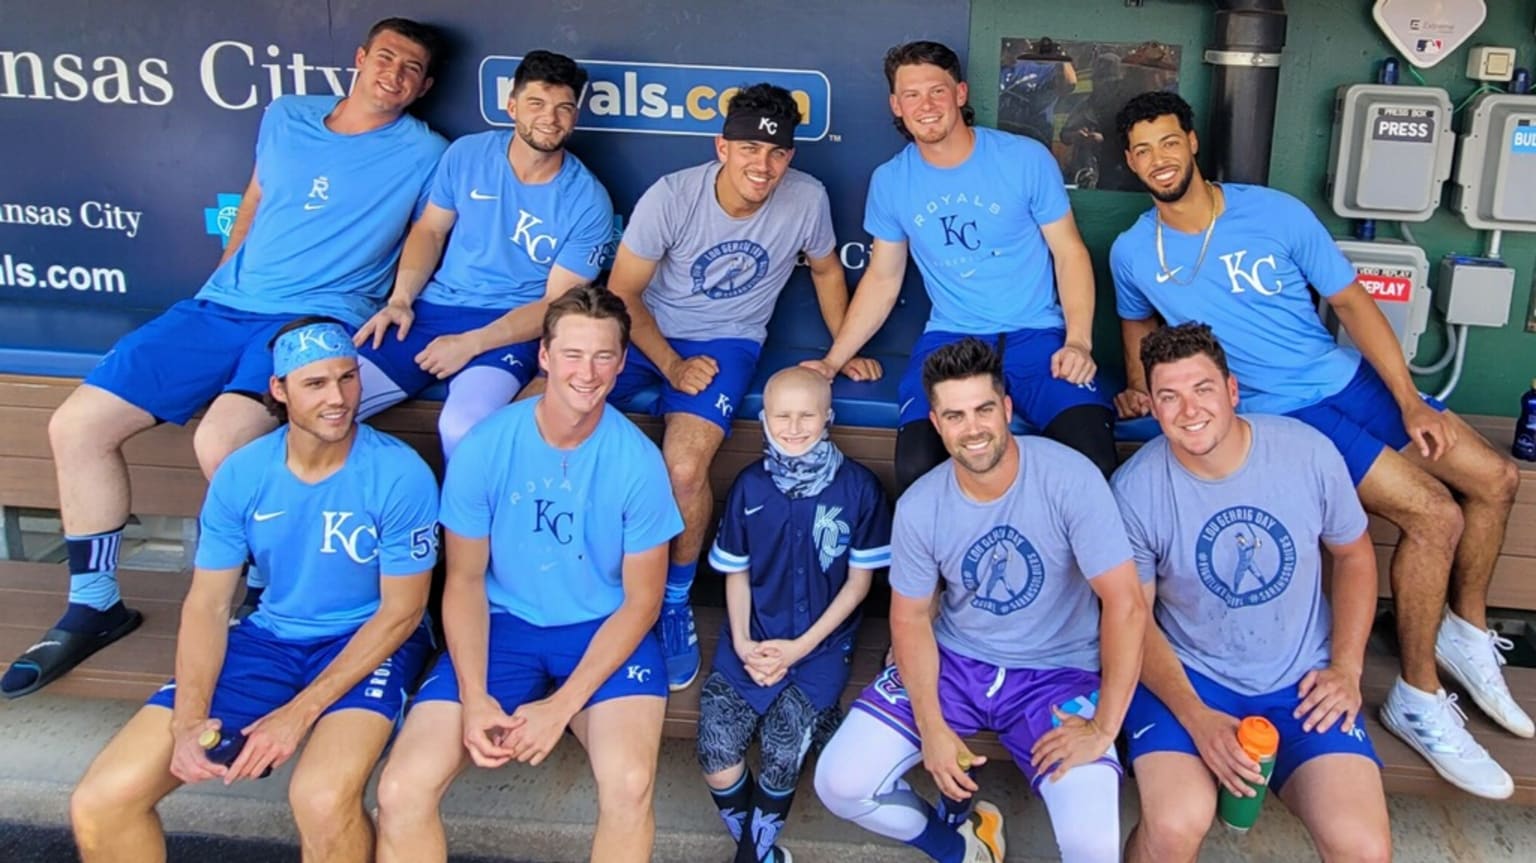 Nine Royals players sit on the dugout bench around a young fan